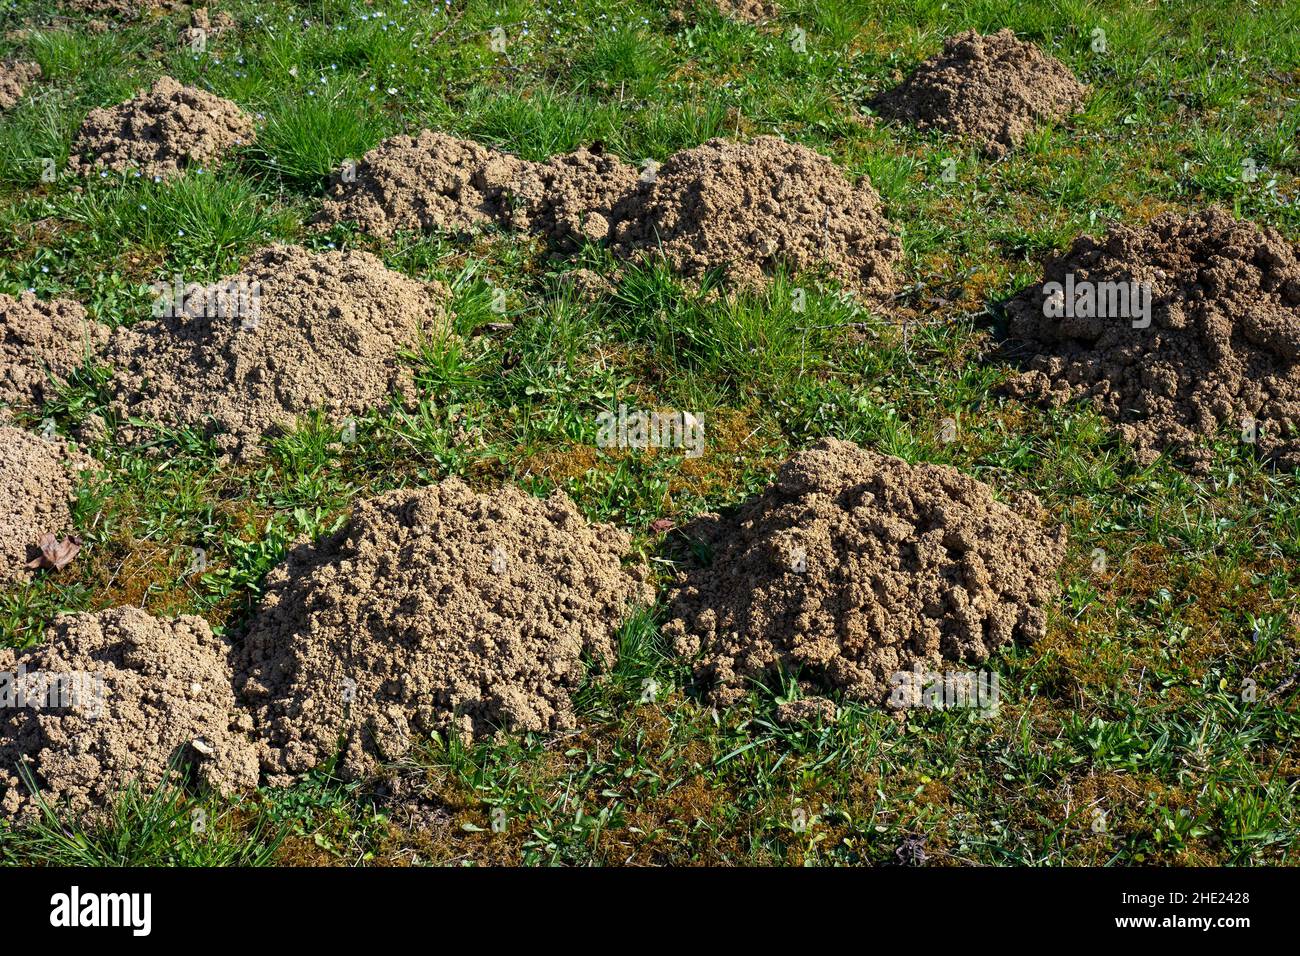 Signs of a mole moving earth in the garden. Stock Photo